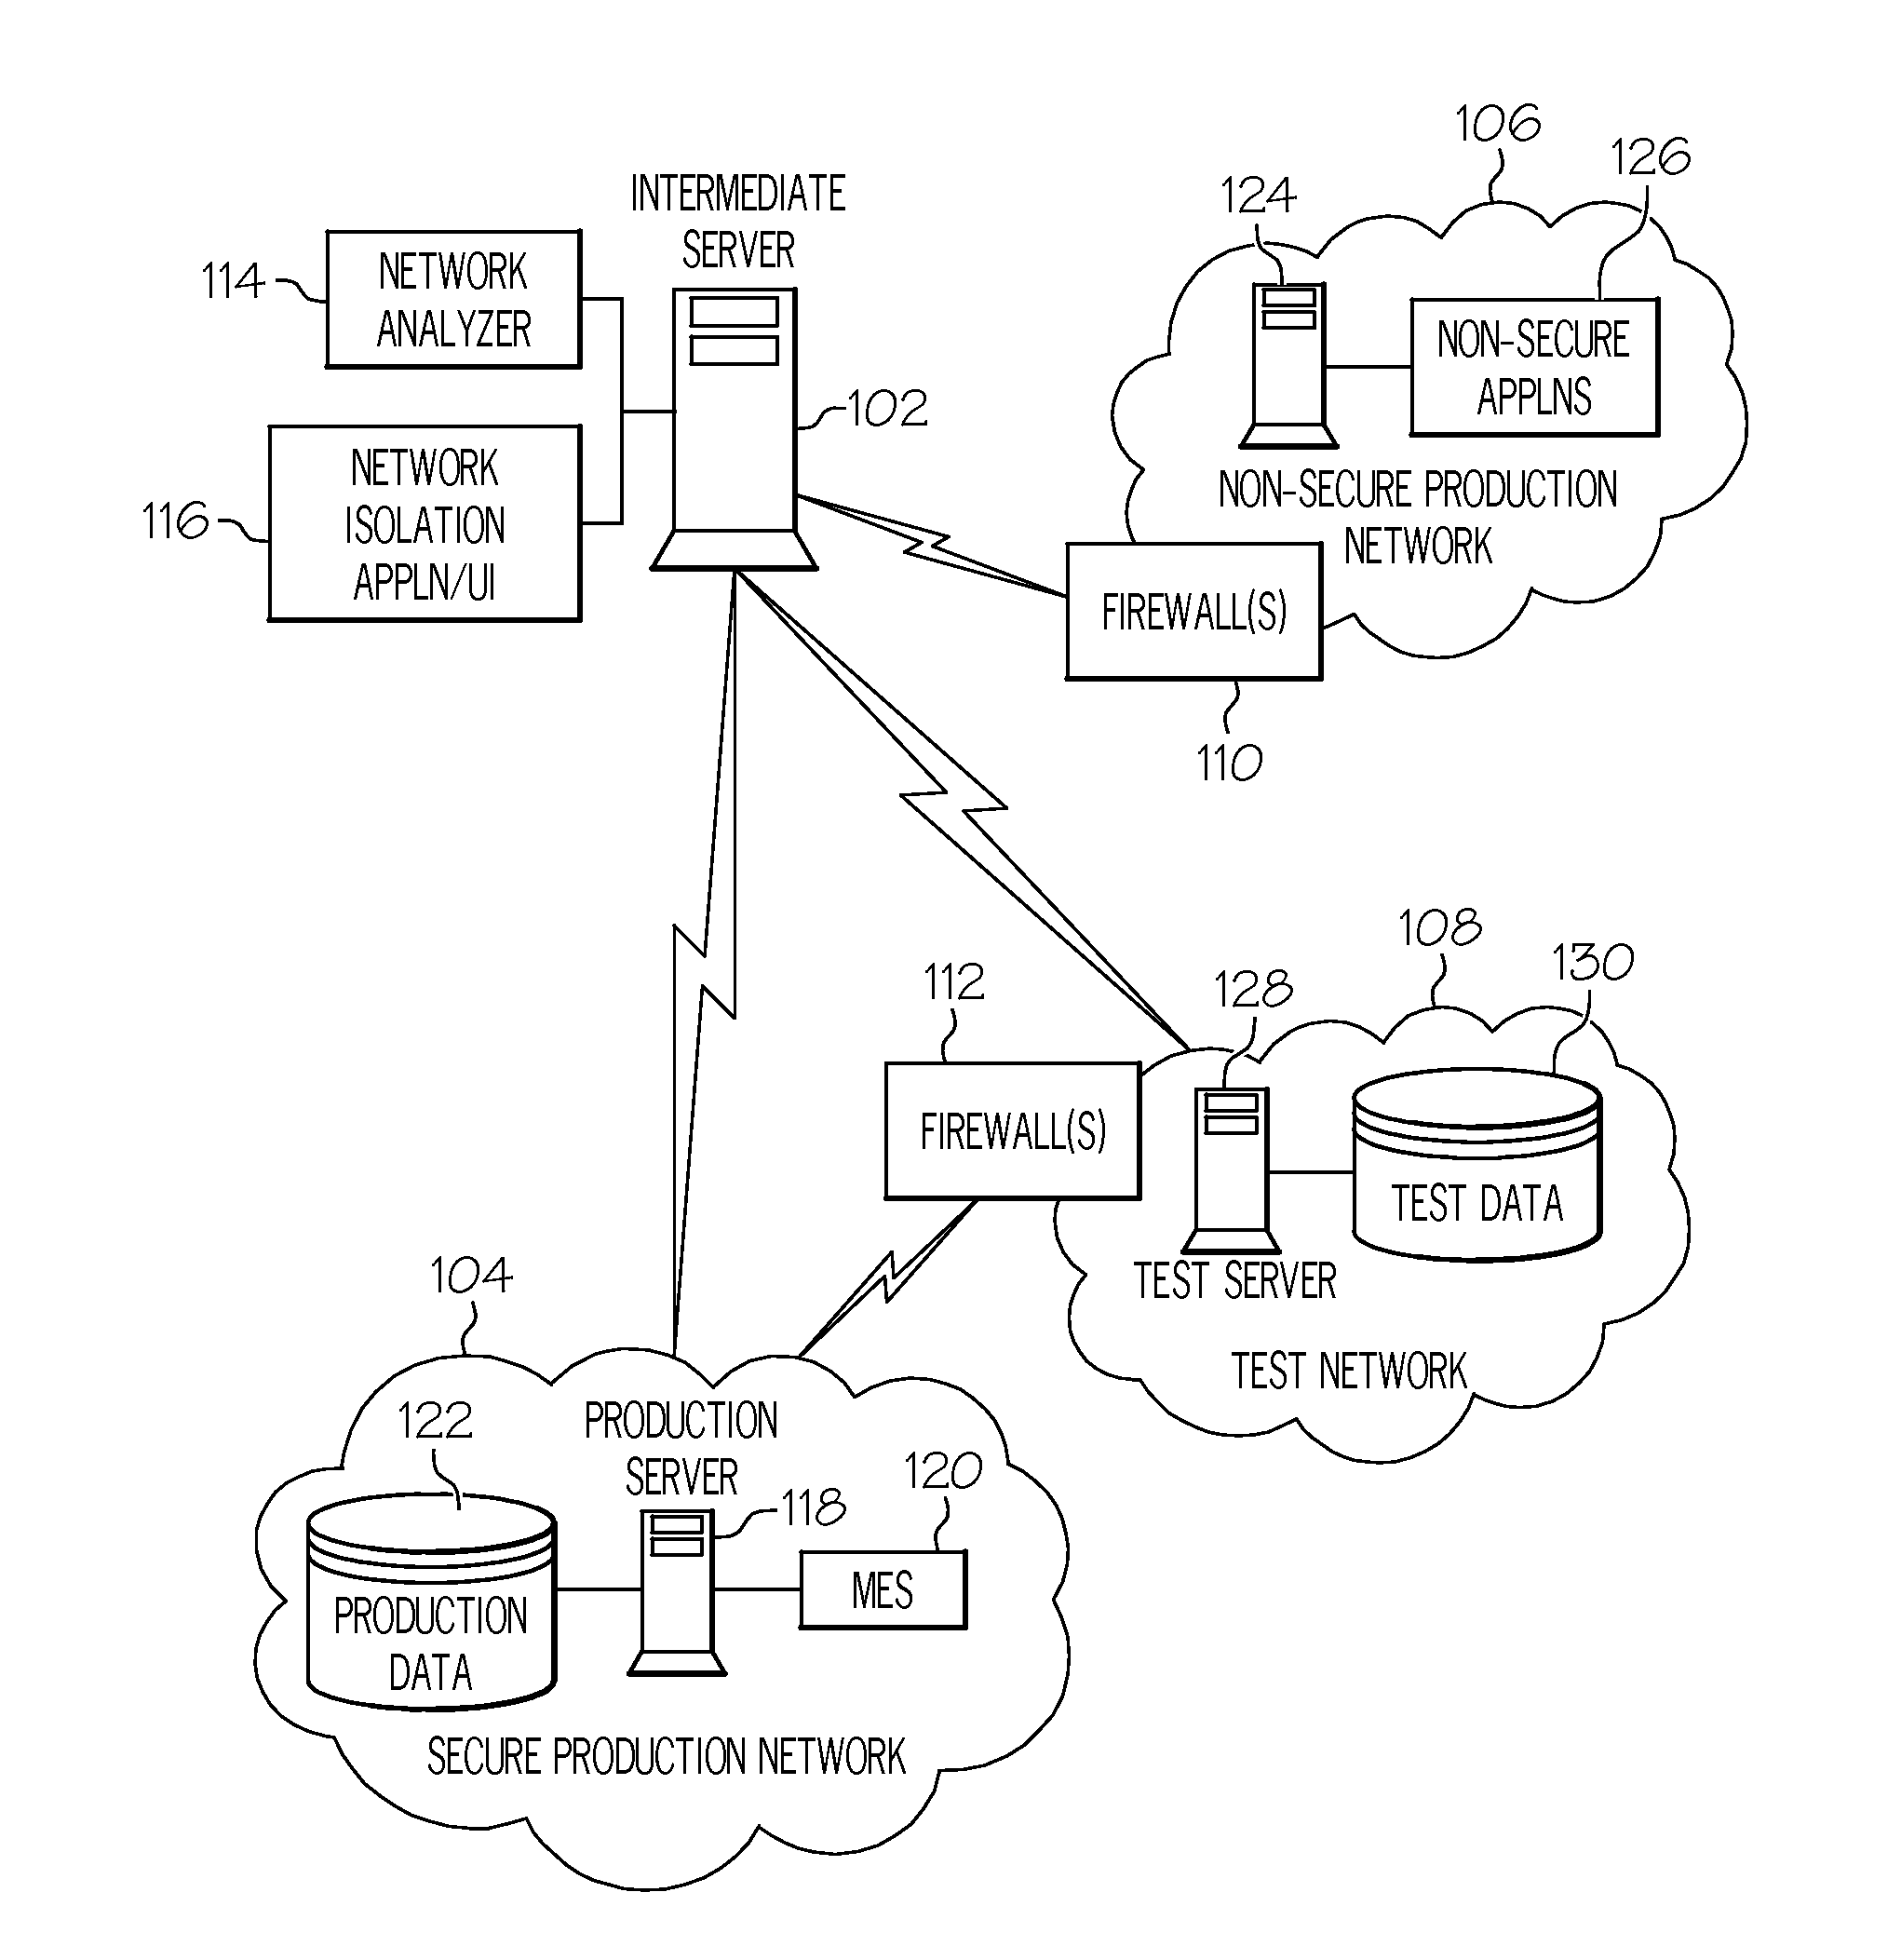 Methods, systems, and computer program products for modeling a secure production network